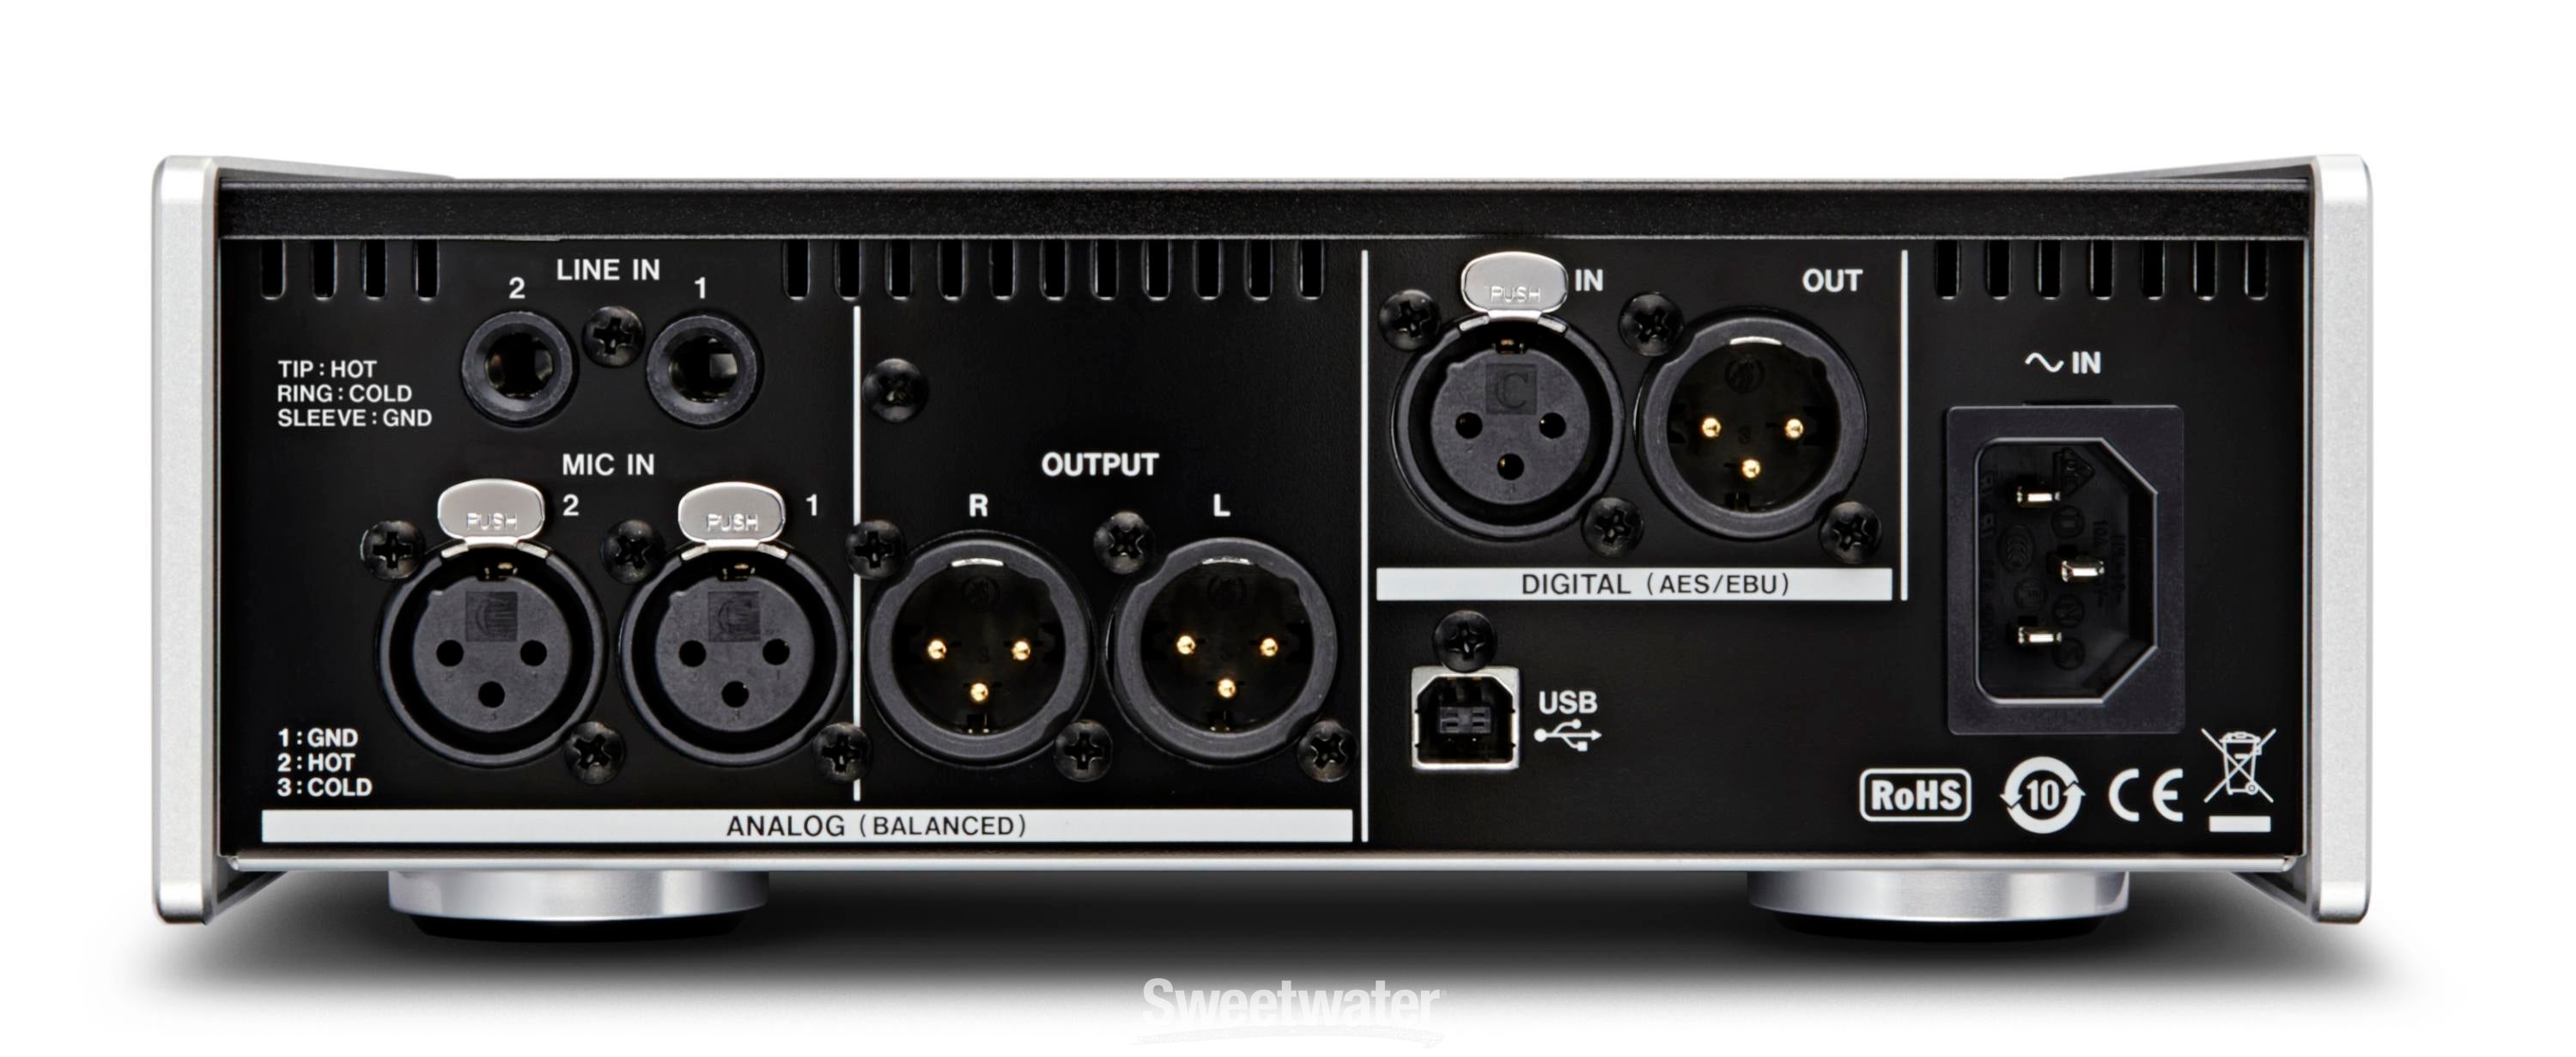 TASCAM UH-7000 Reviews | Sweetwater